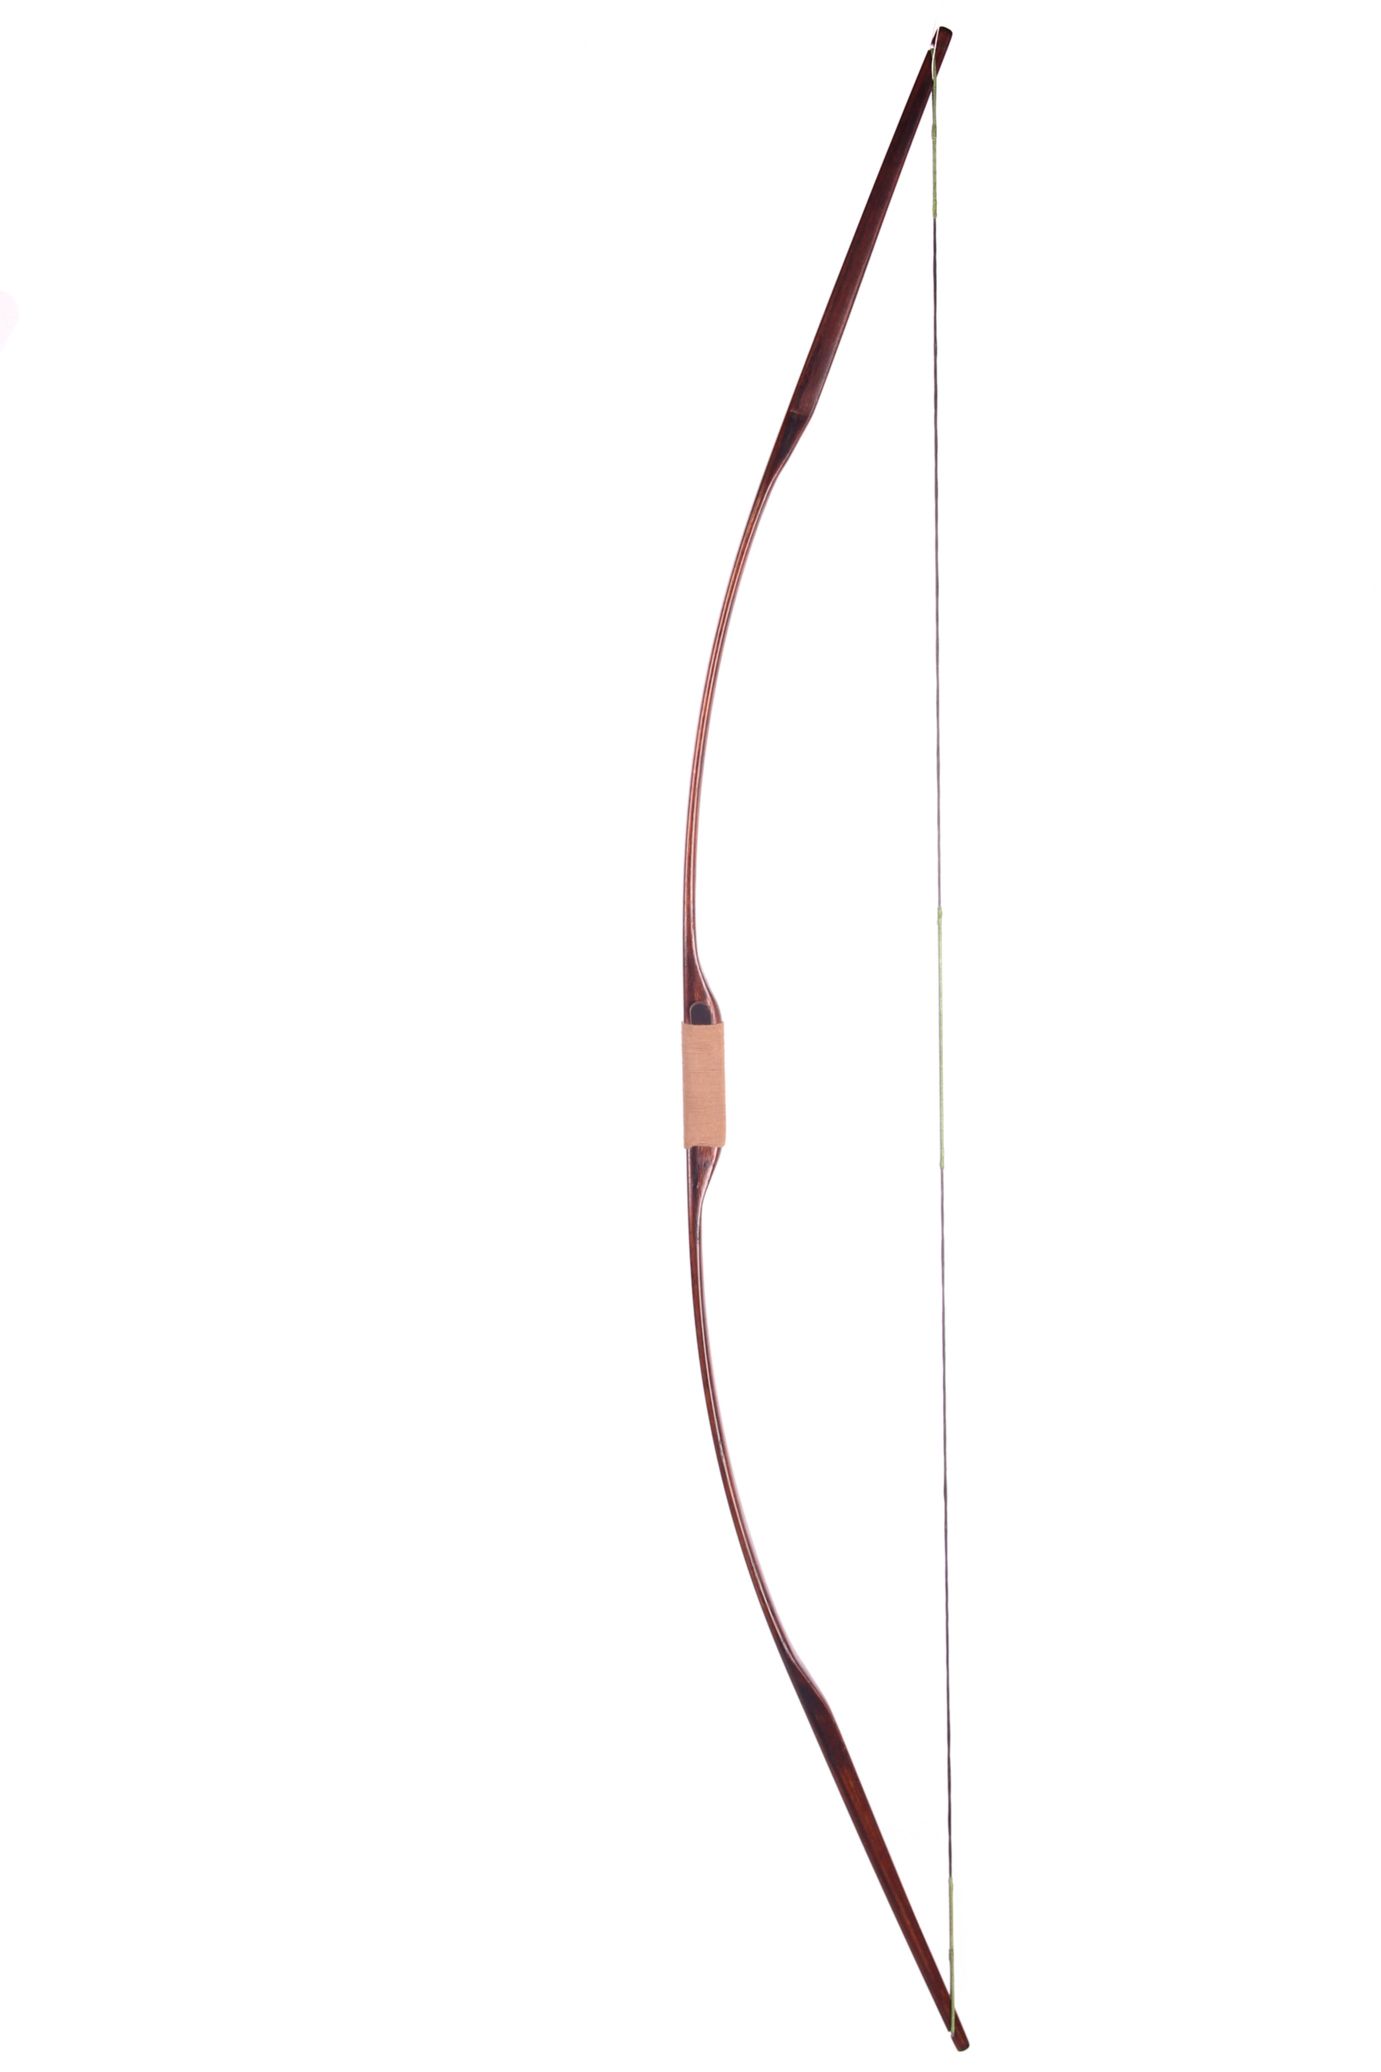 wooden bow with a taut bowstring on a white background